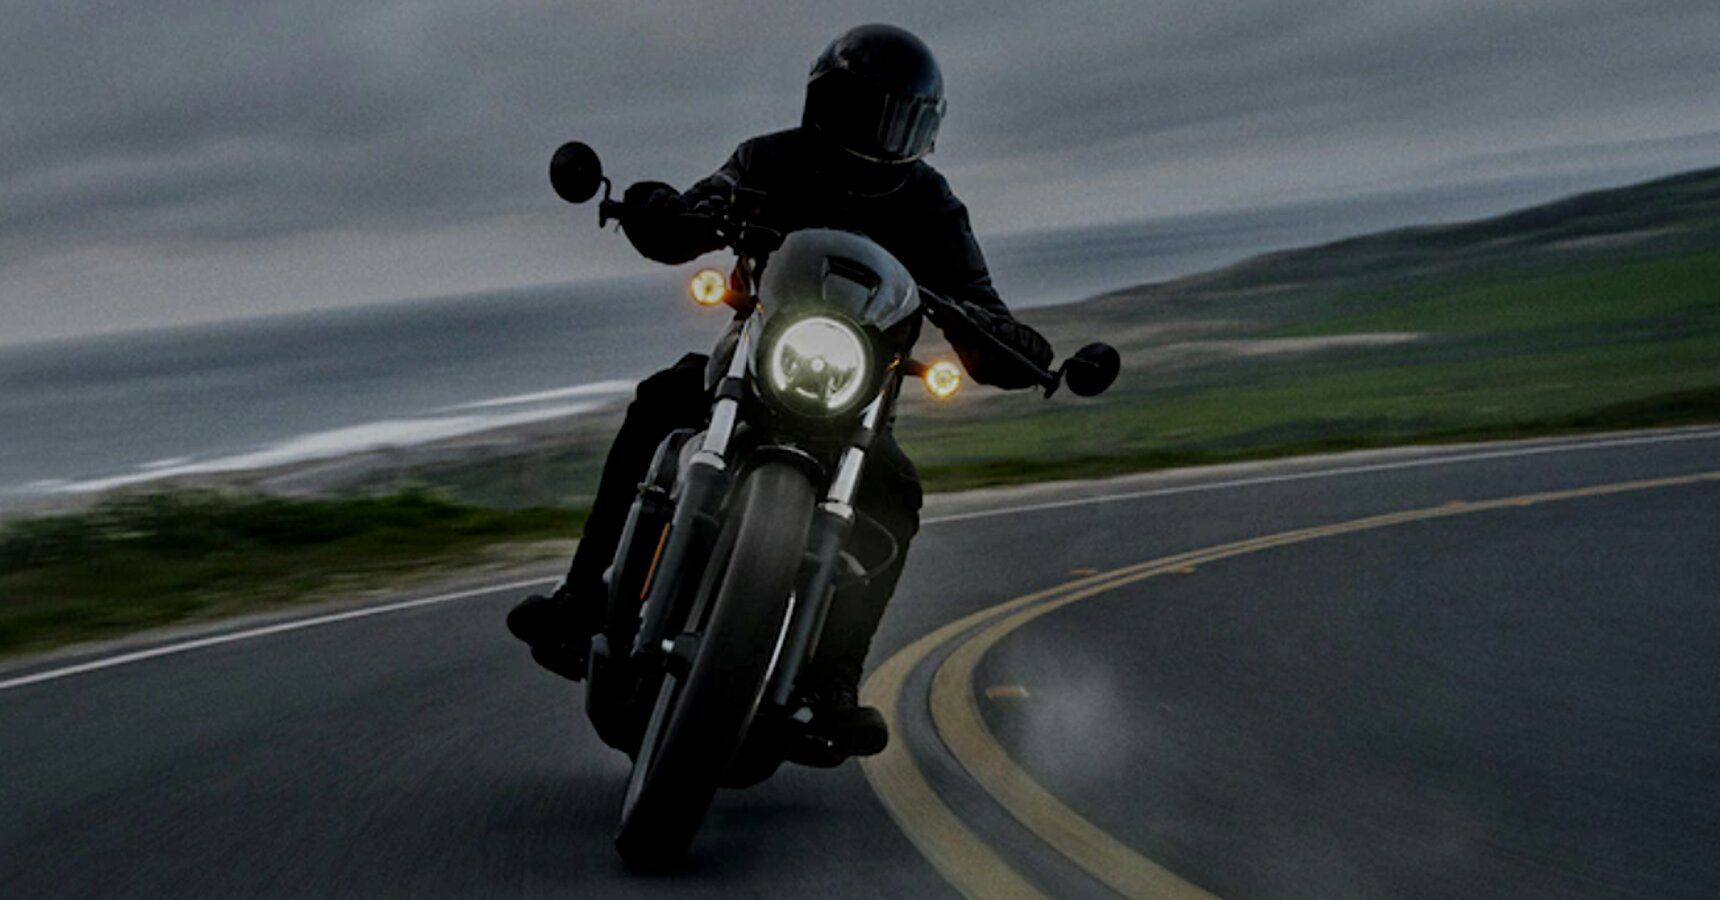 The all-new Harley-Davidson Nightster.